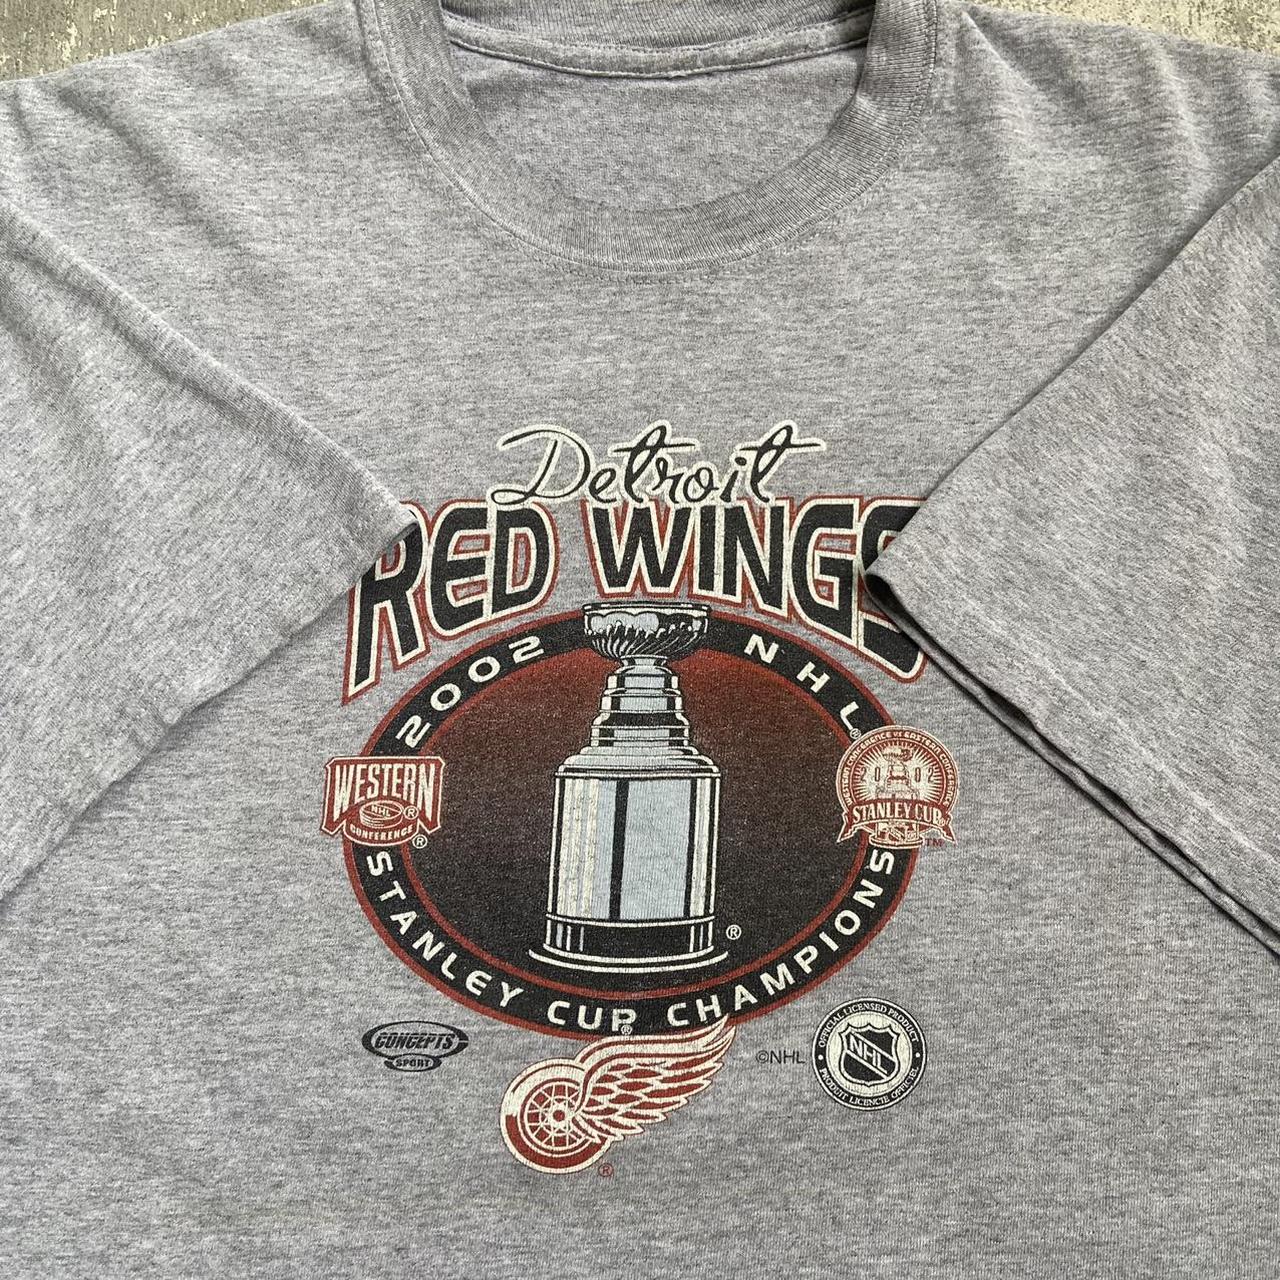 VINTAGE Detroit Red Wings T Shirt Mens Large 2002 Stanley Cup